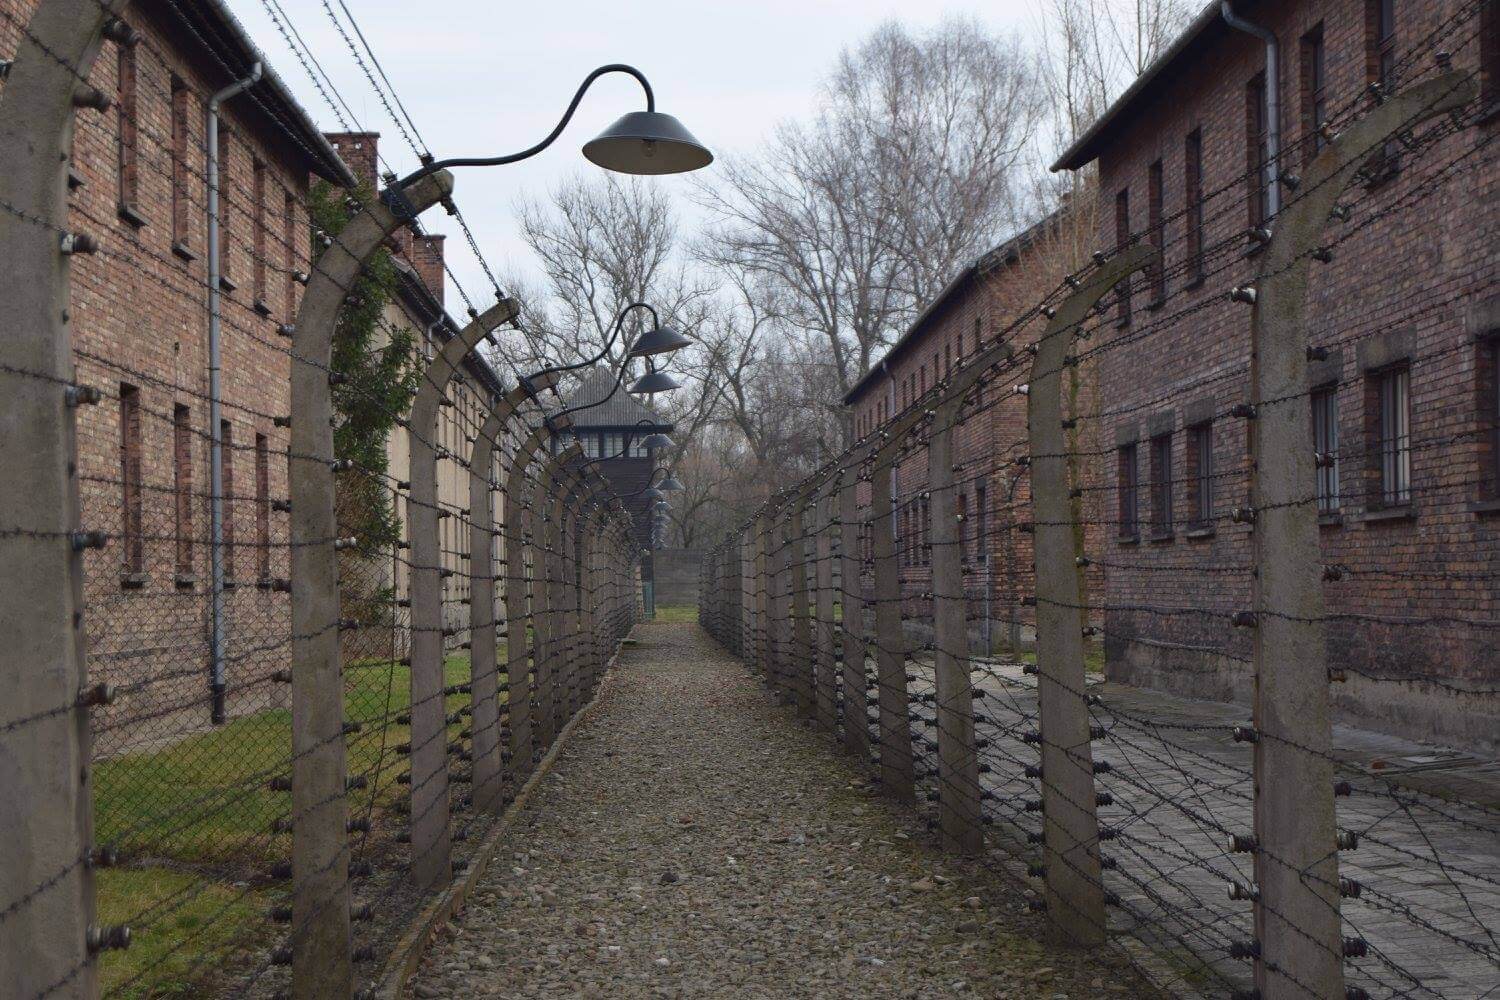 Auschwitz concentration camp, a death camps in Nazi-occupied Poland where 1.1 million were killed during the Nazi Holocaust. (Photo: Tamam Abusalama)